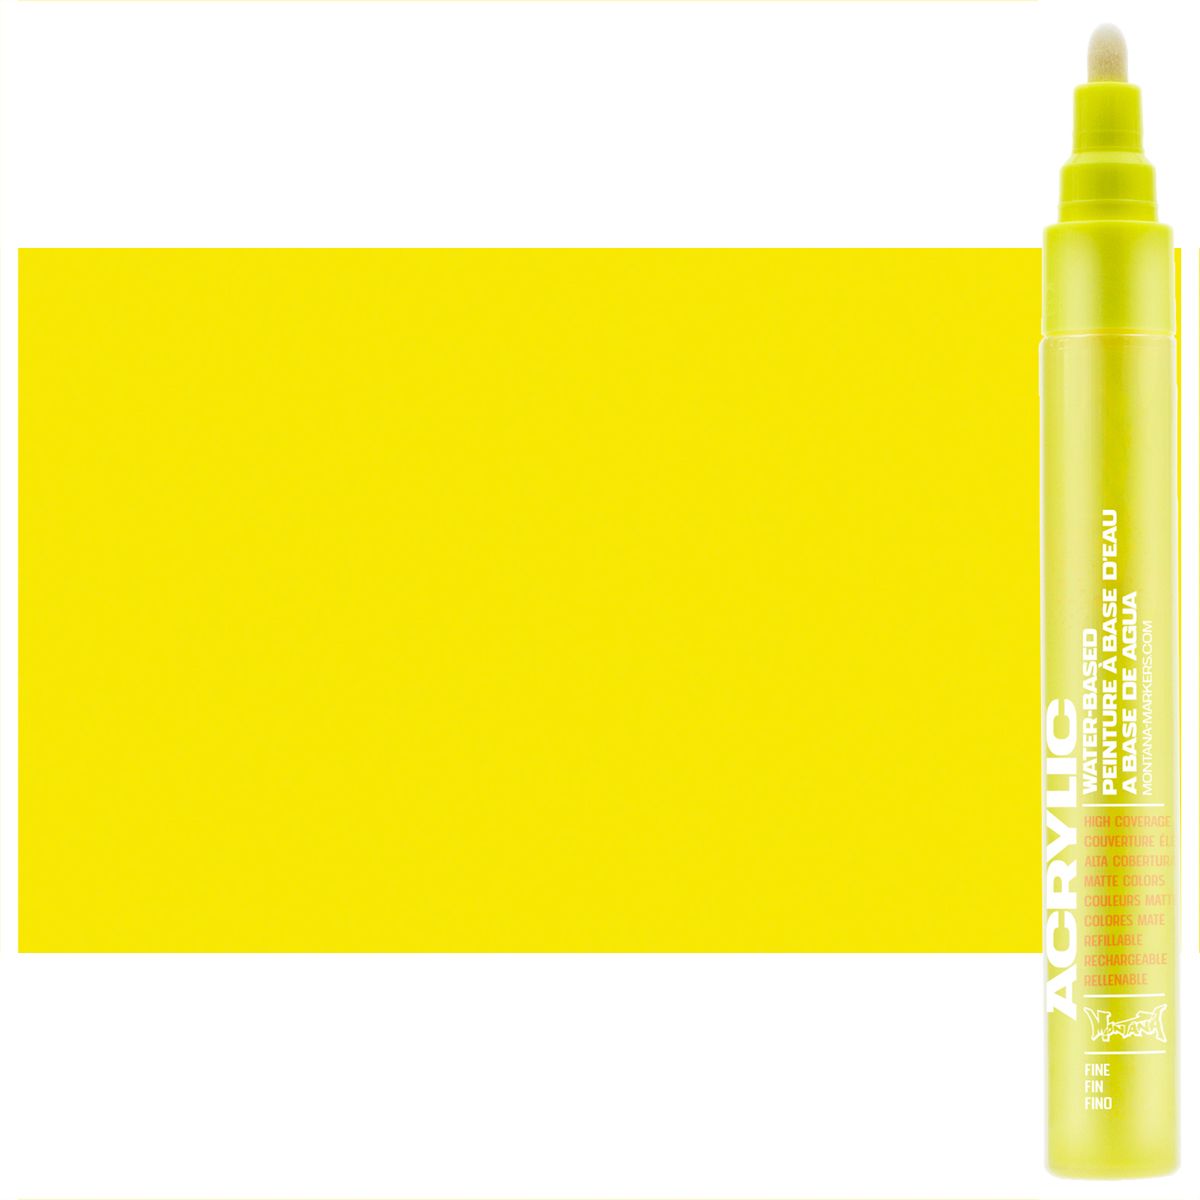 Montana refillable acrylic paint markers with replaceable tips - Flash Yellow